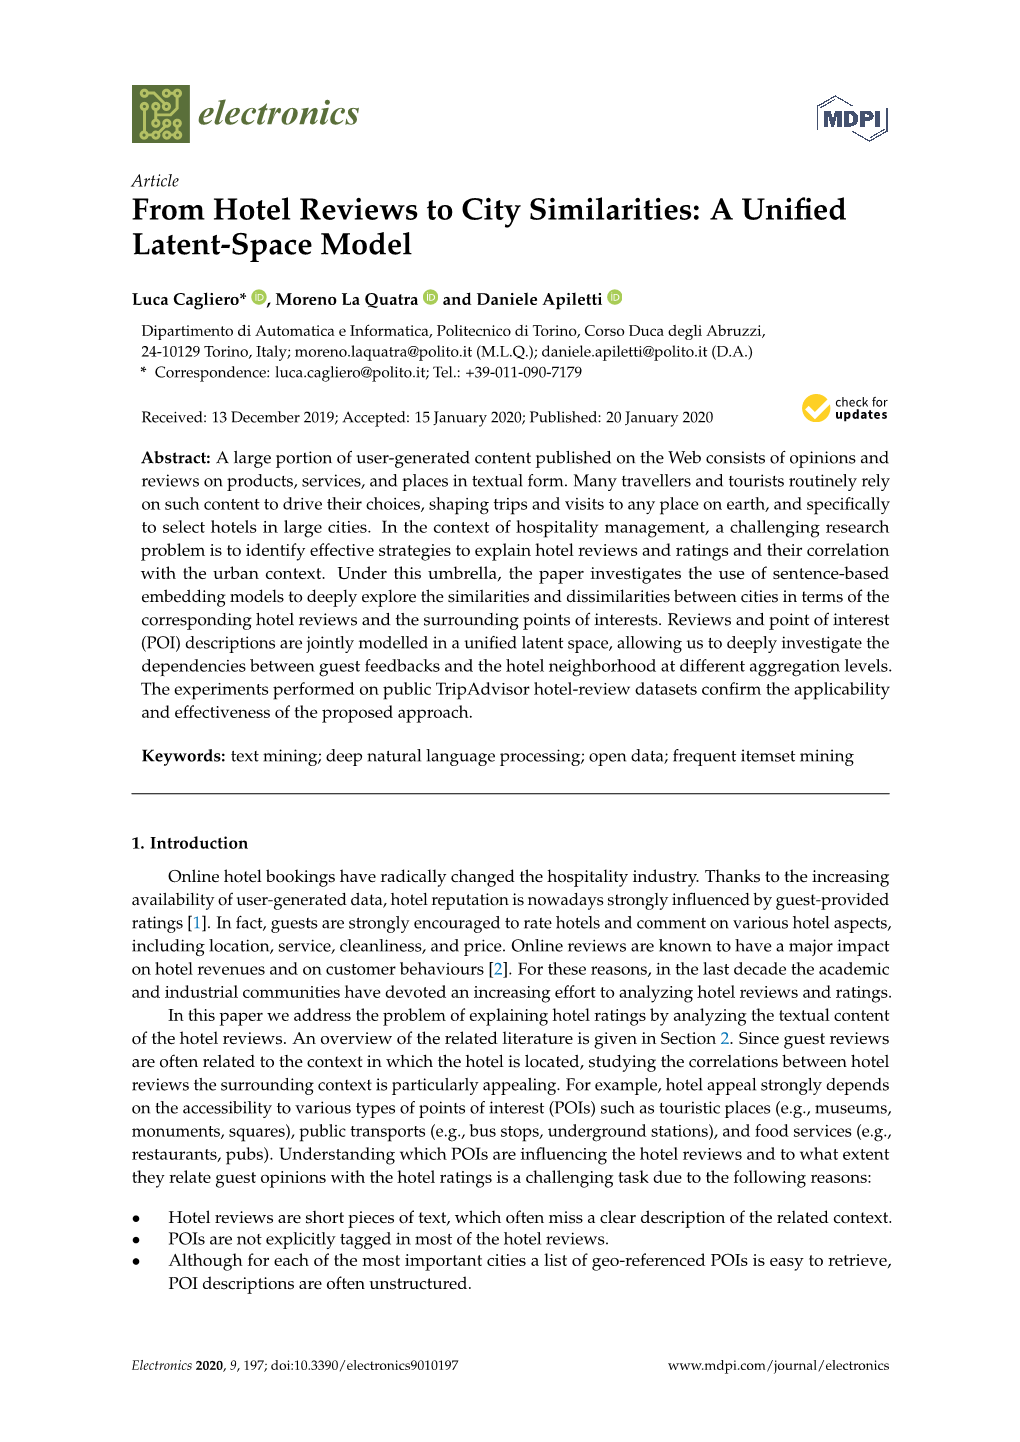 From Hotel Reviews to City Similarities: a Unified Latent-Space